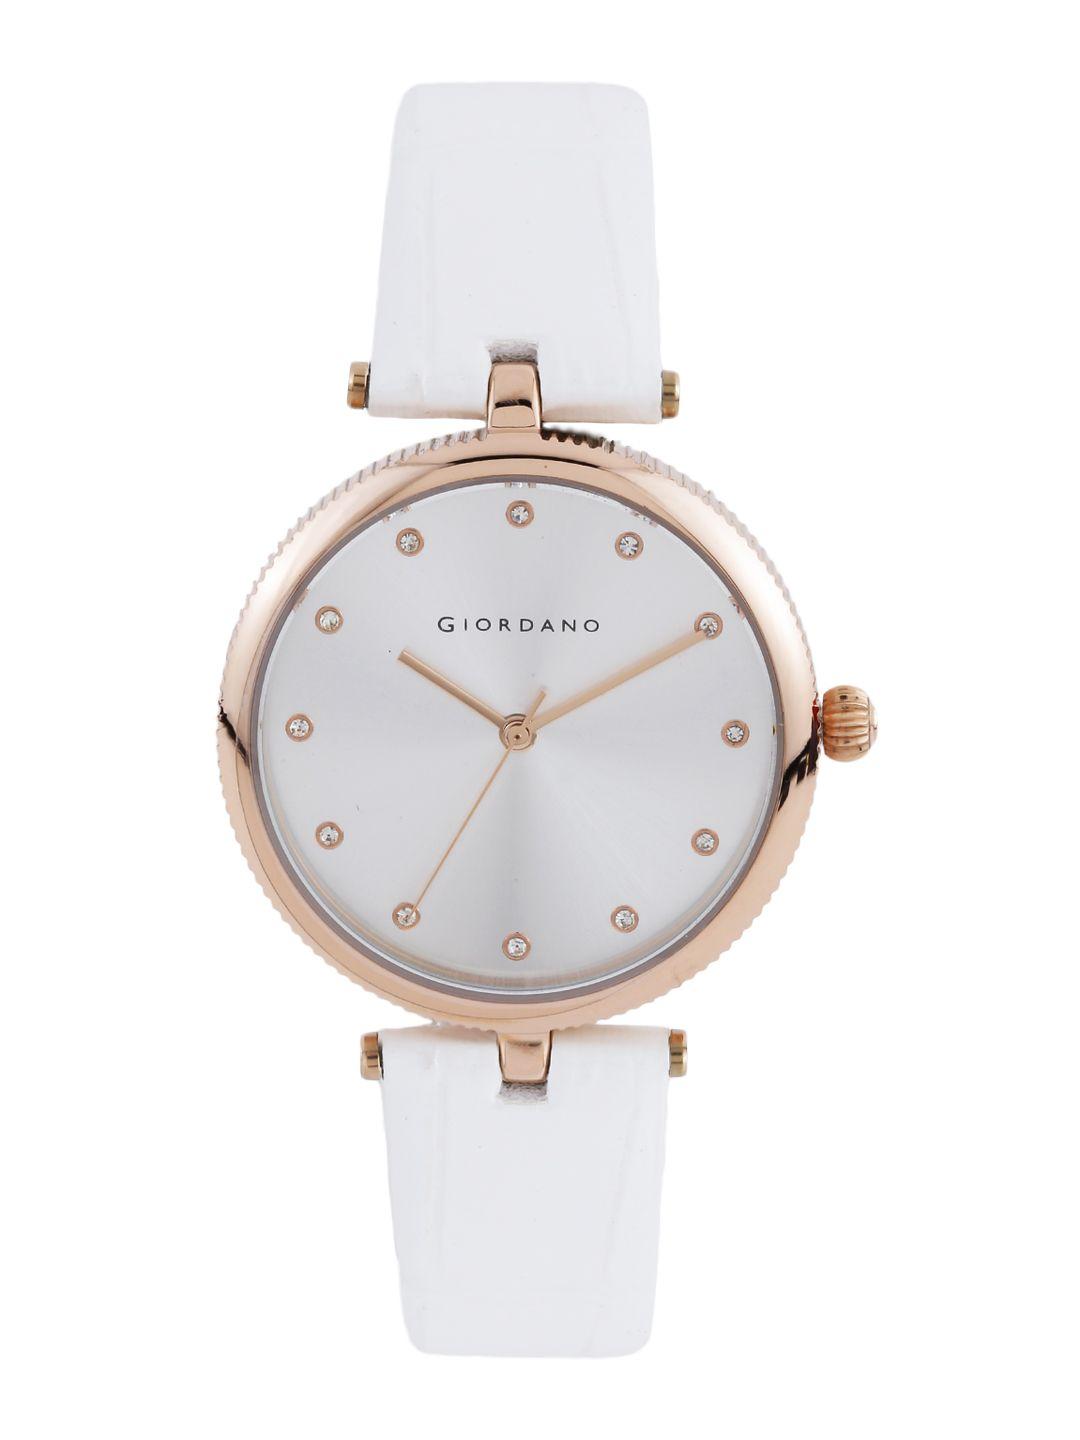 giordano-women-silver-toned-stone-studded-dial-watch-a2038-06